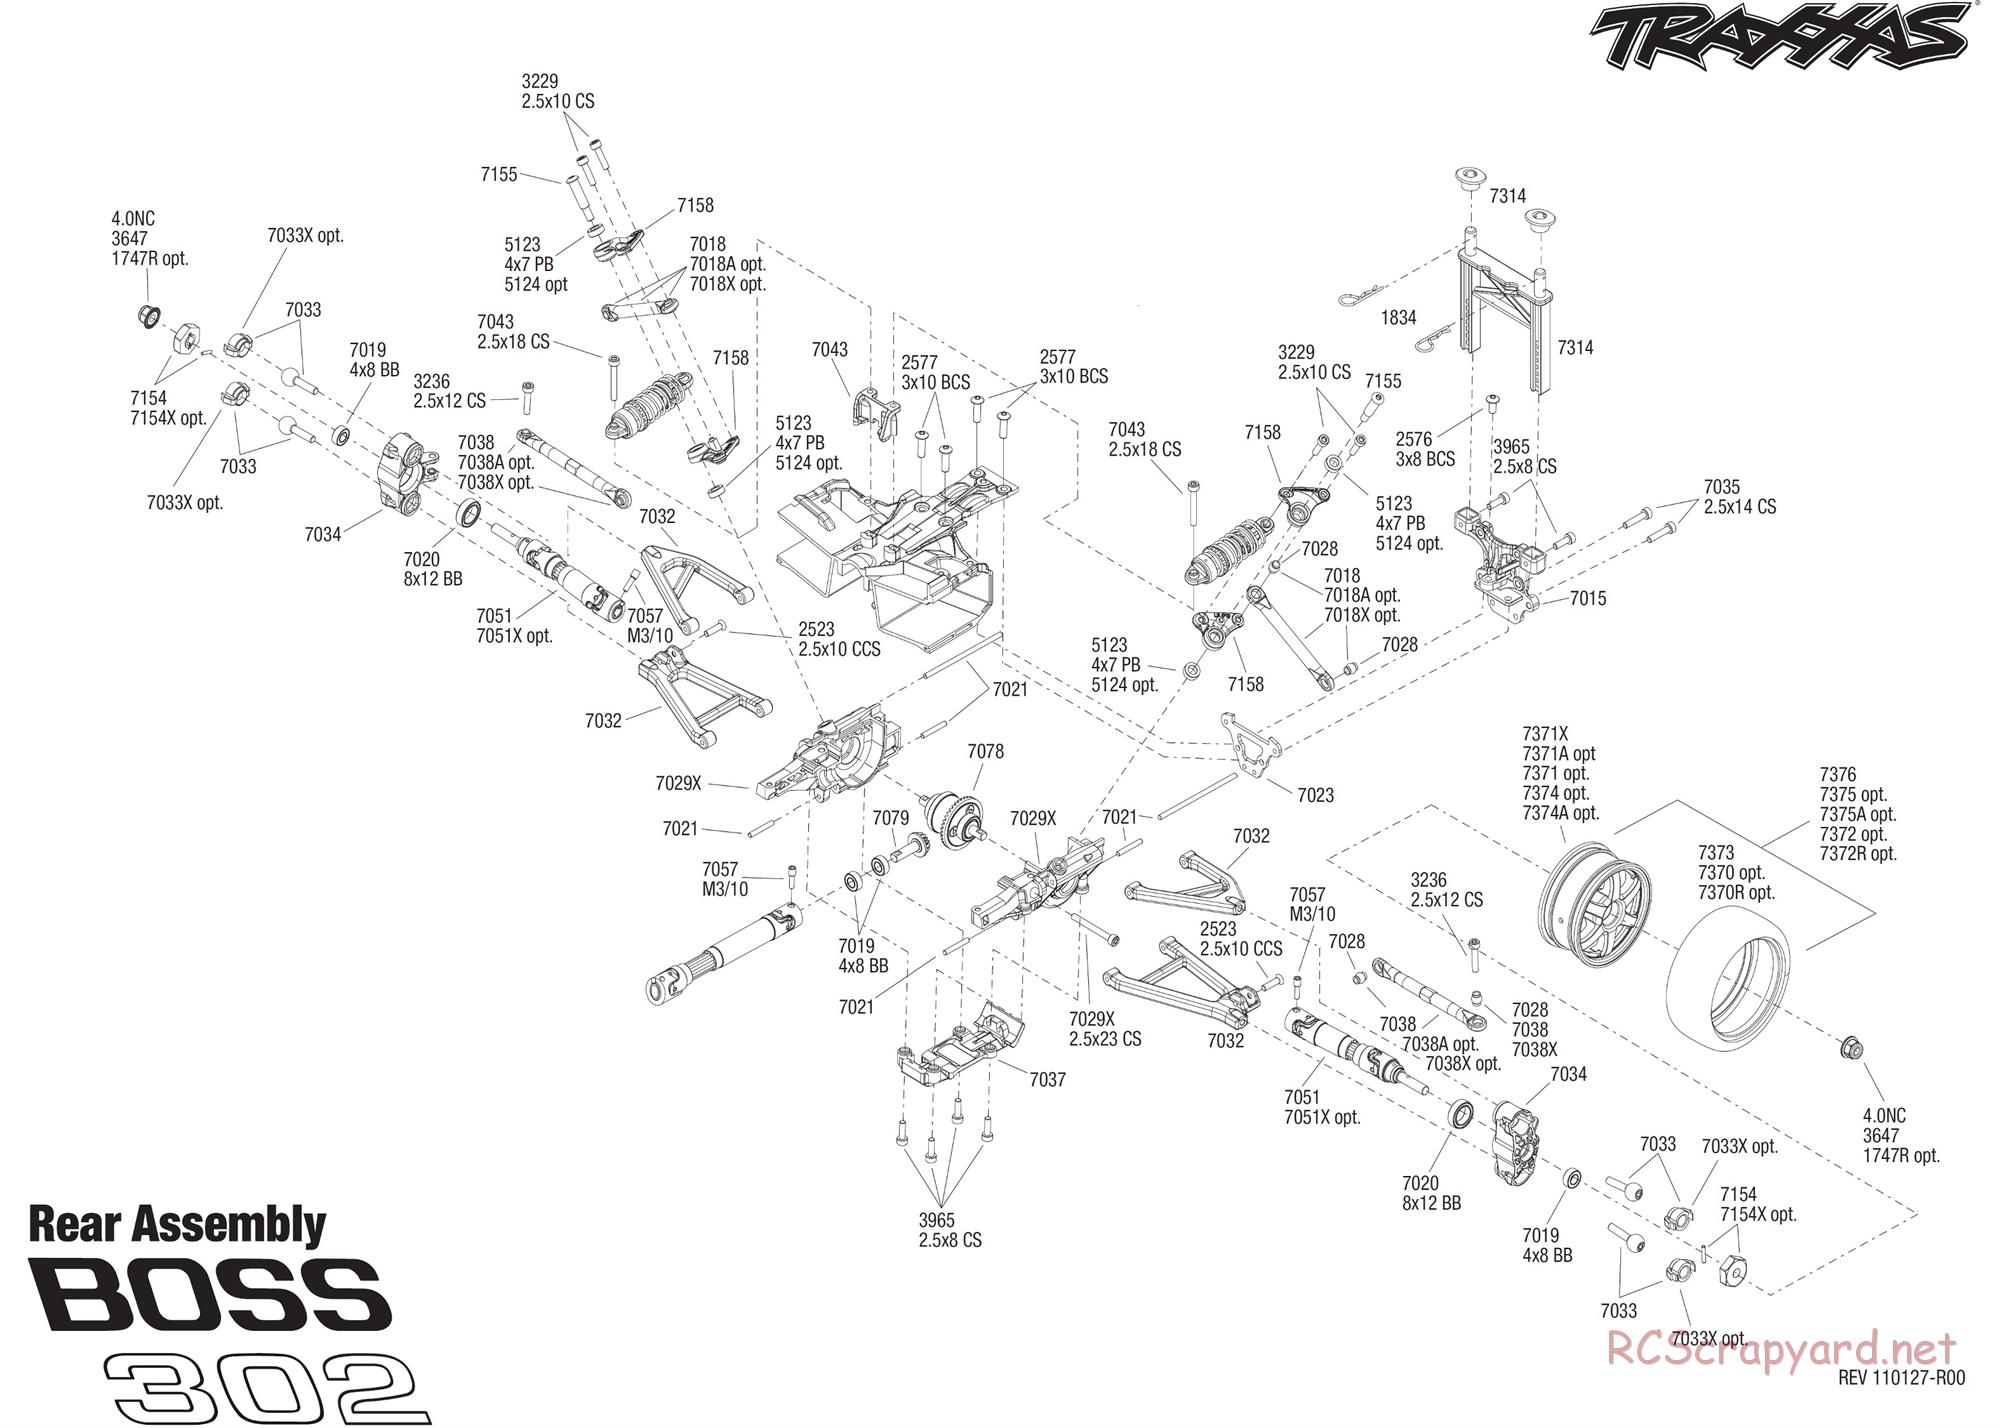 Traxxas - 1/16 Ford Mustang Boss 302 Brushless (2011) - Exploded Views - Page 4